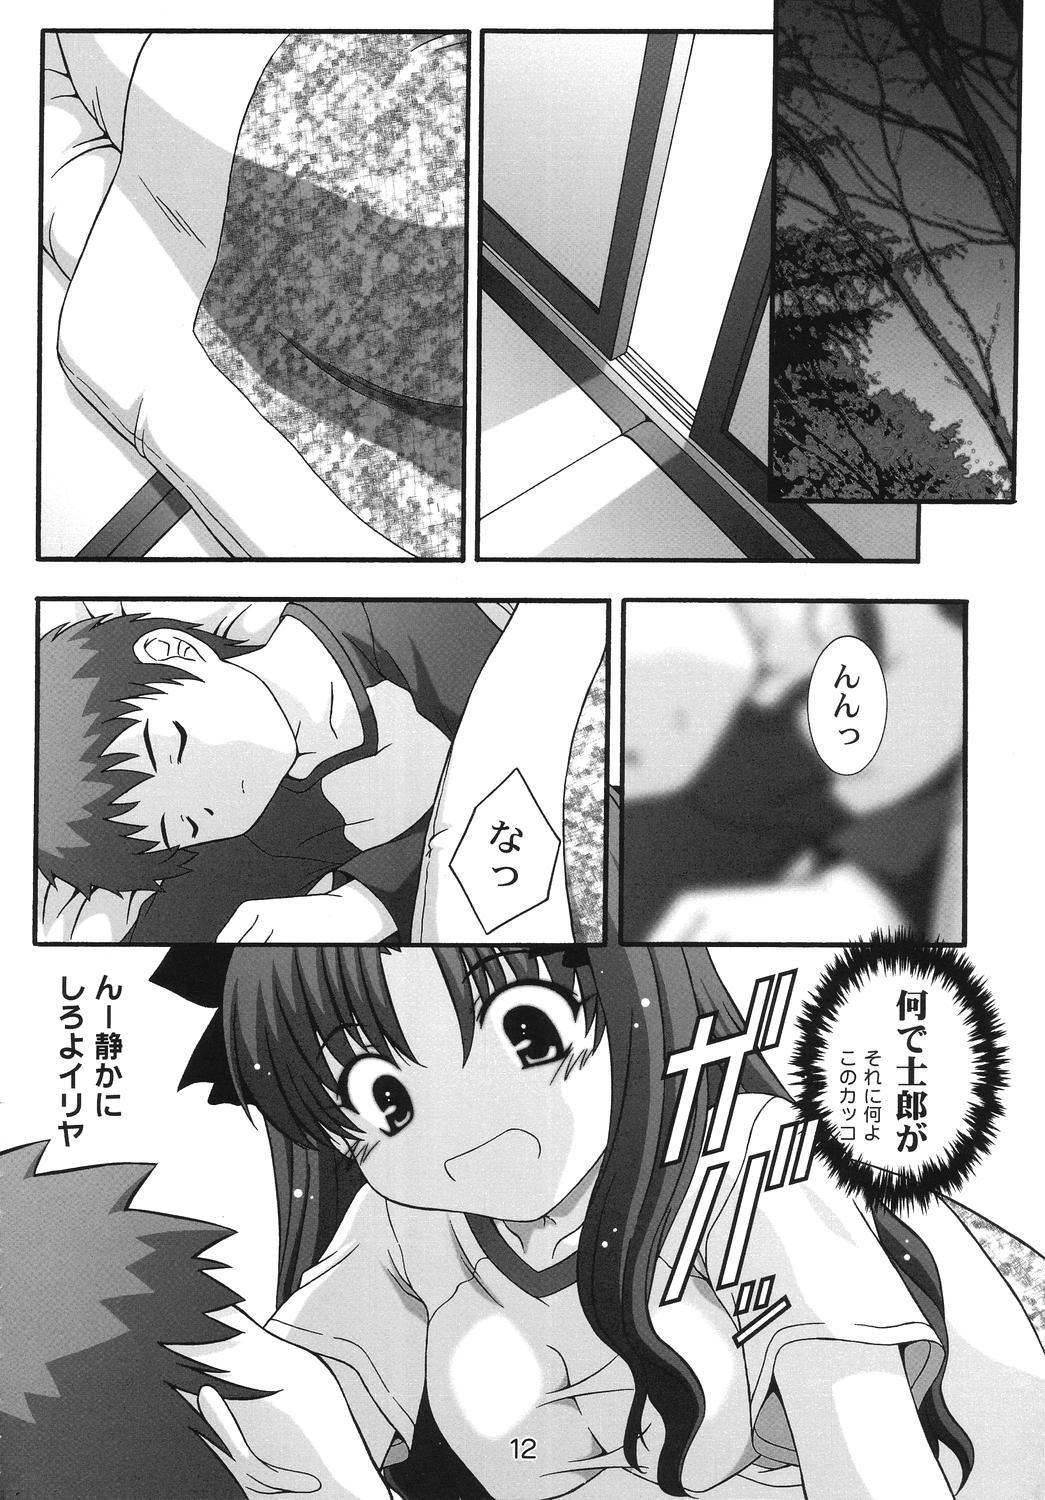 Goth SECRET FILE NEXT 11 - Fate is capricious - Fate stay night Orgame - Page 11